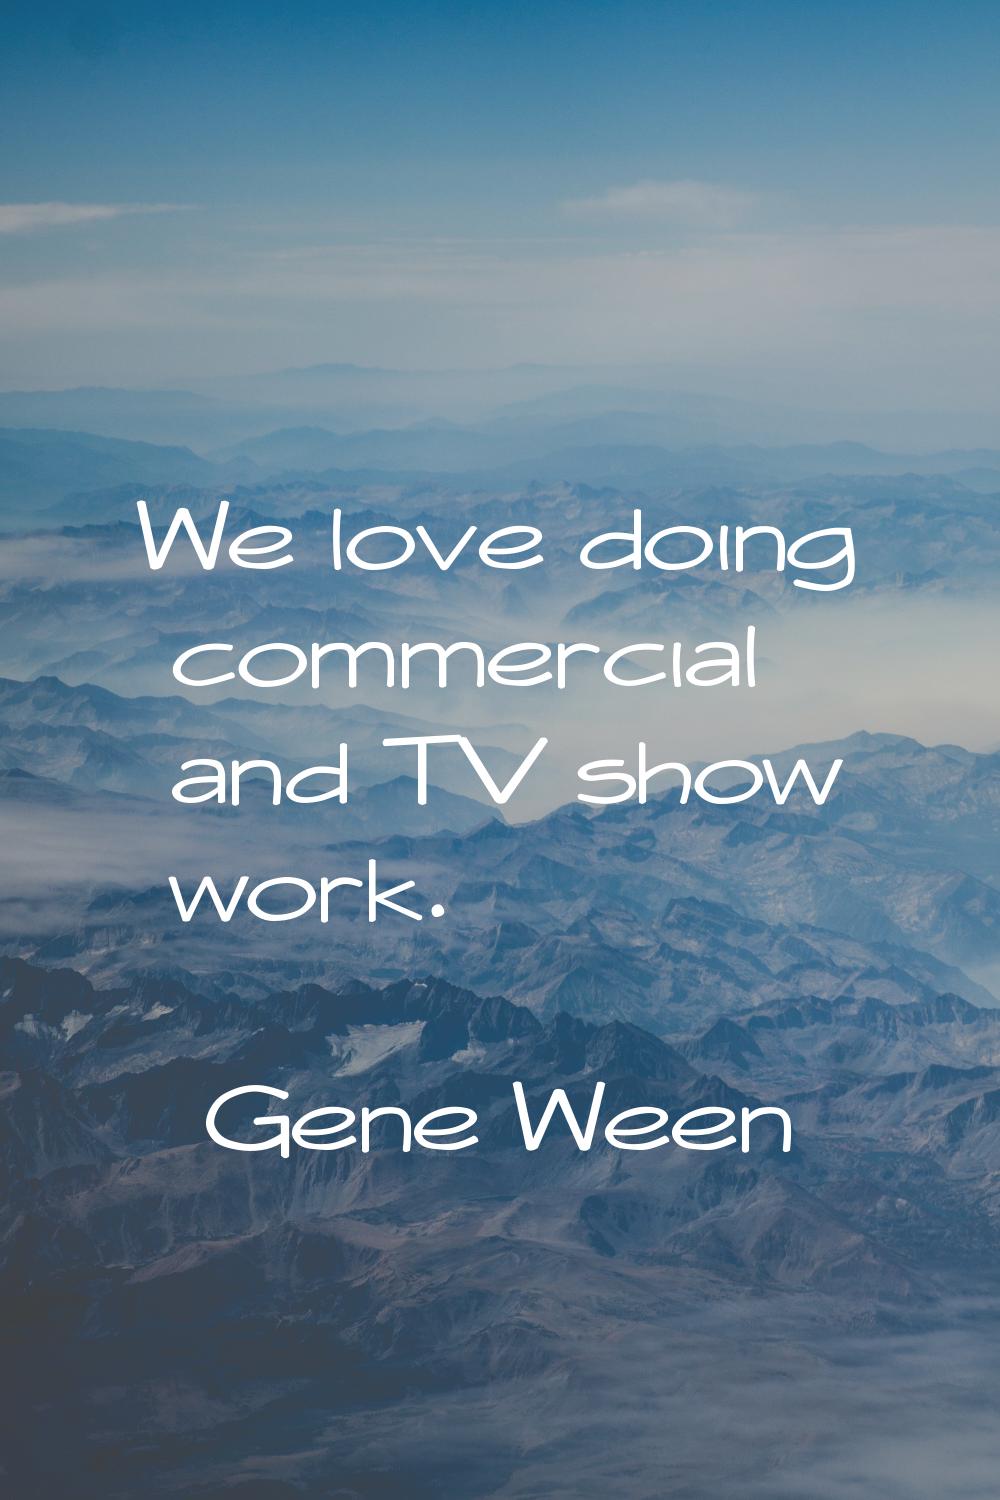 We love doing commercial and TV show work.